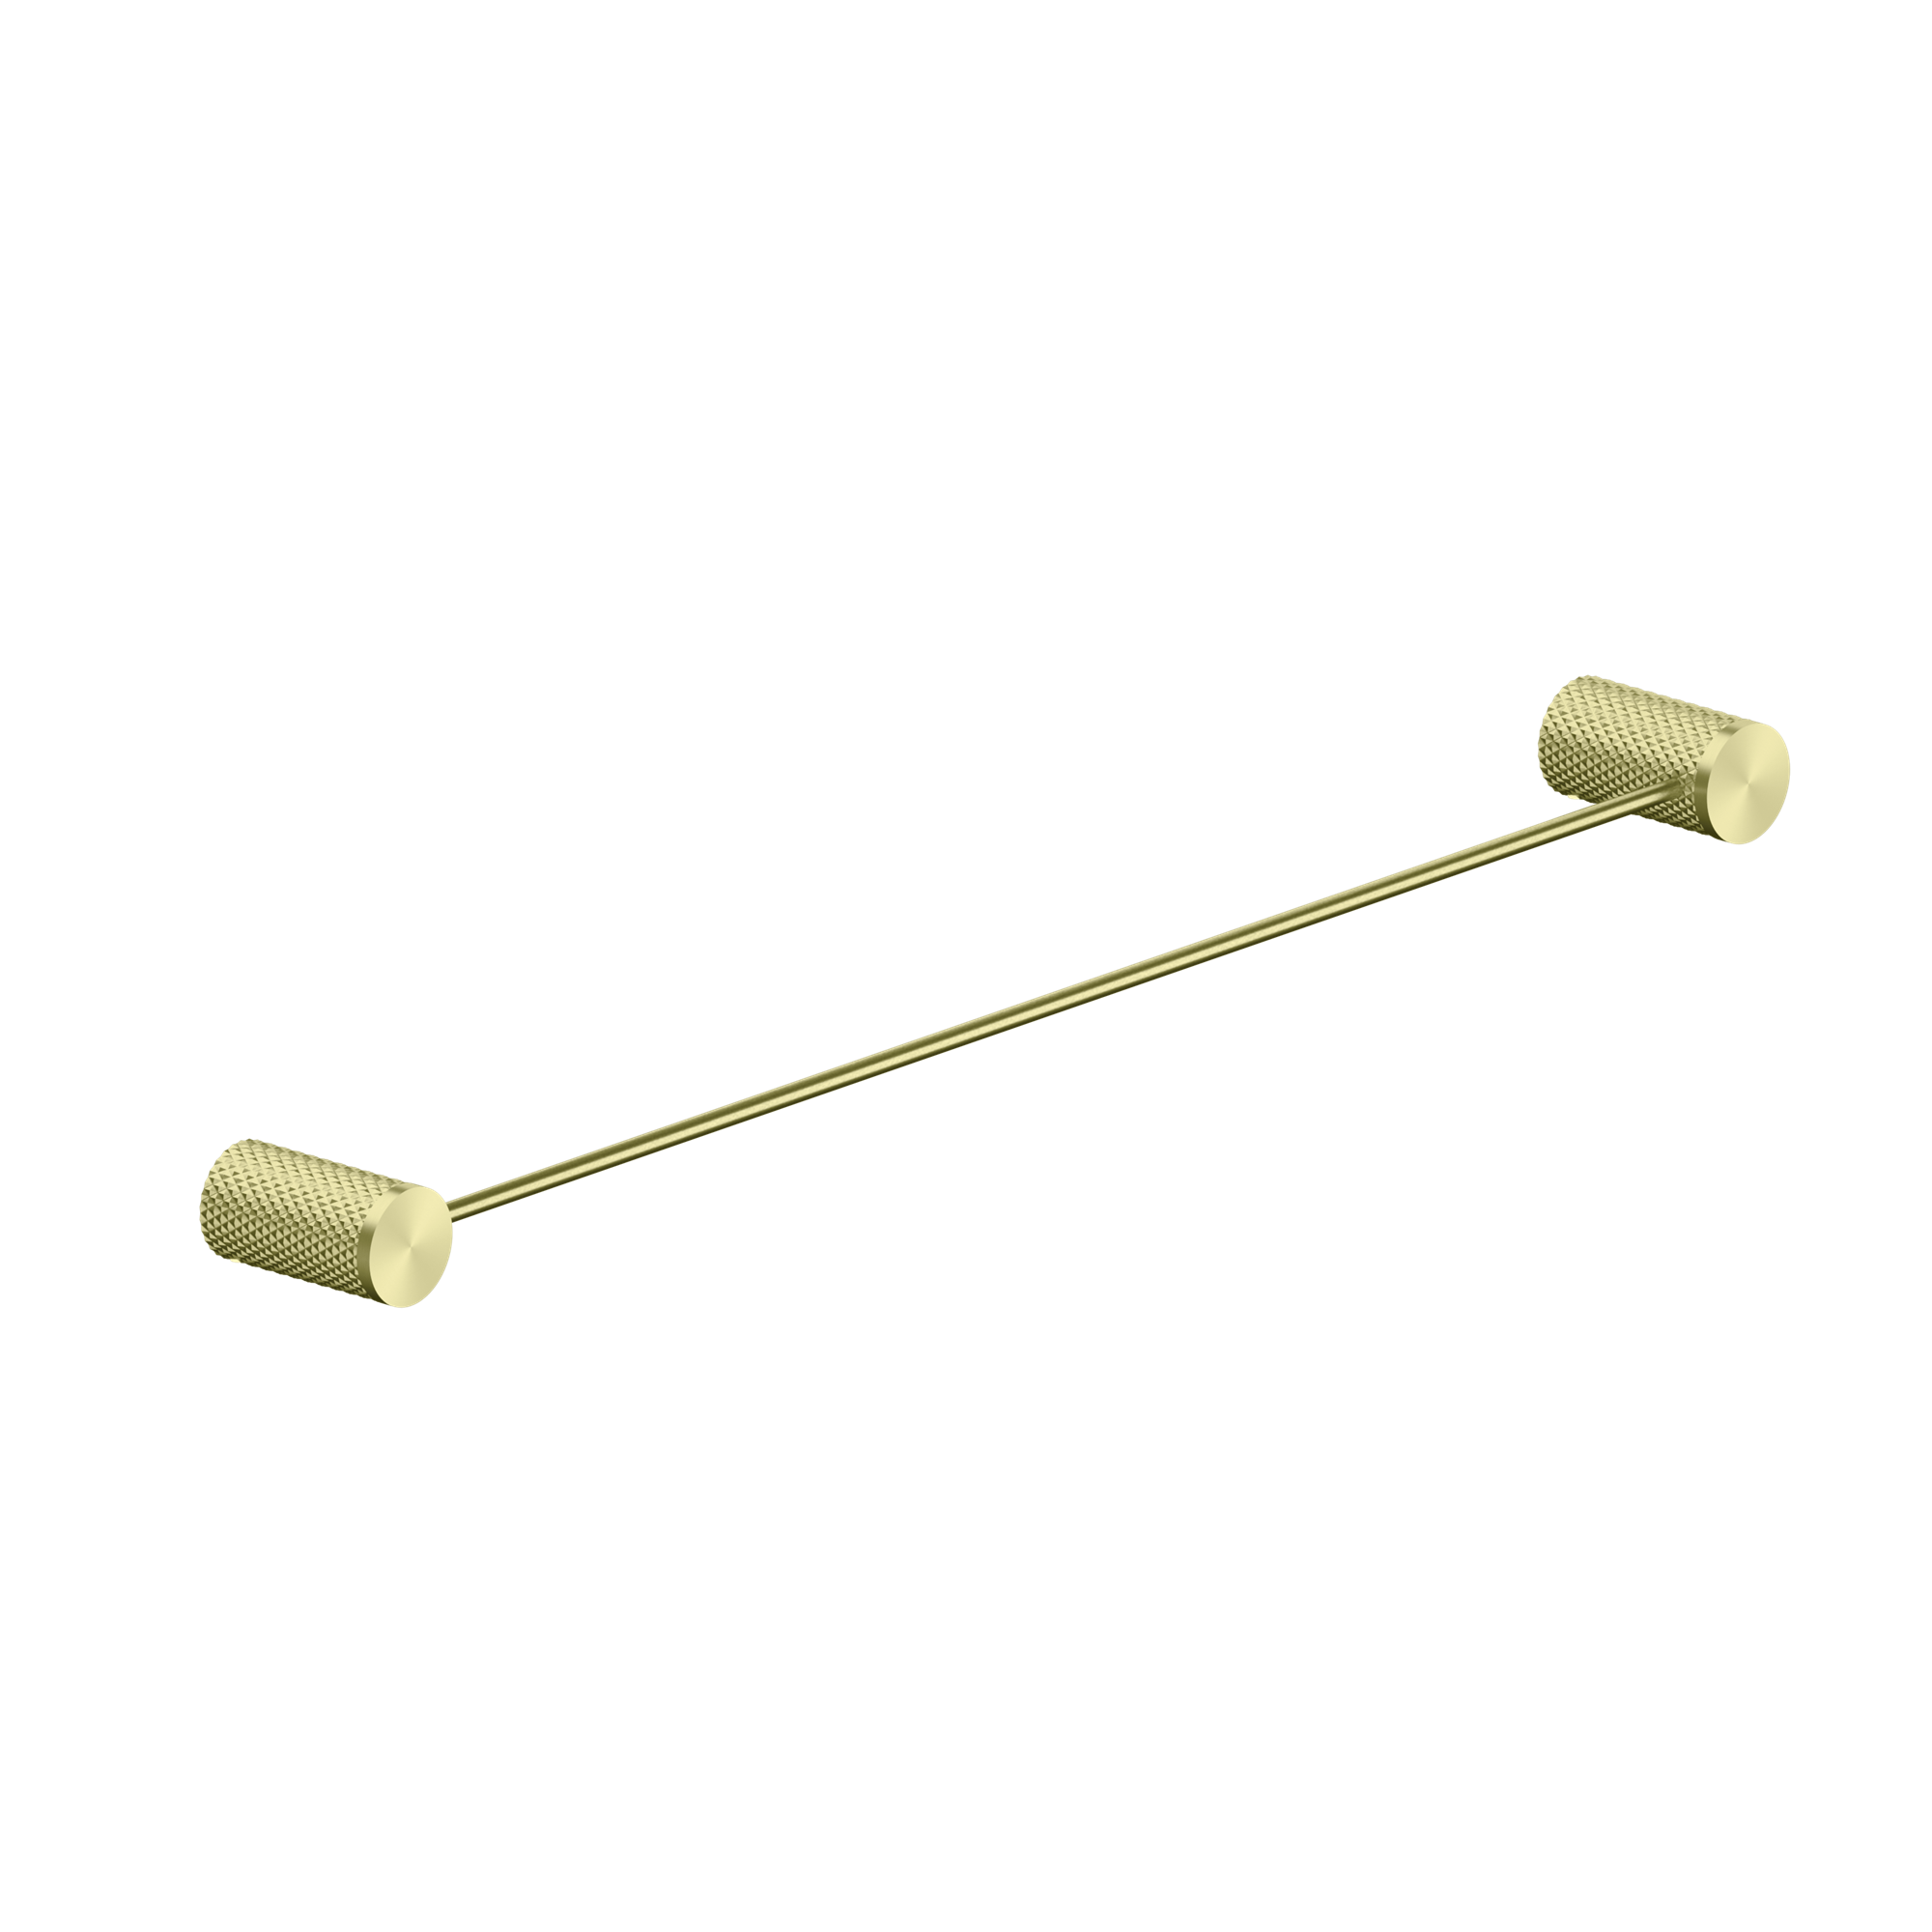 NERO OPAL NON-HEATED SINGLE TOWEL RAIL BRUSHED GOLD (AVAILABLE IN 600MM AND 800MM)